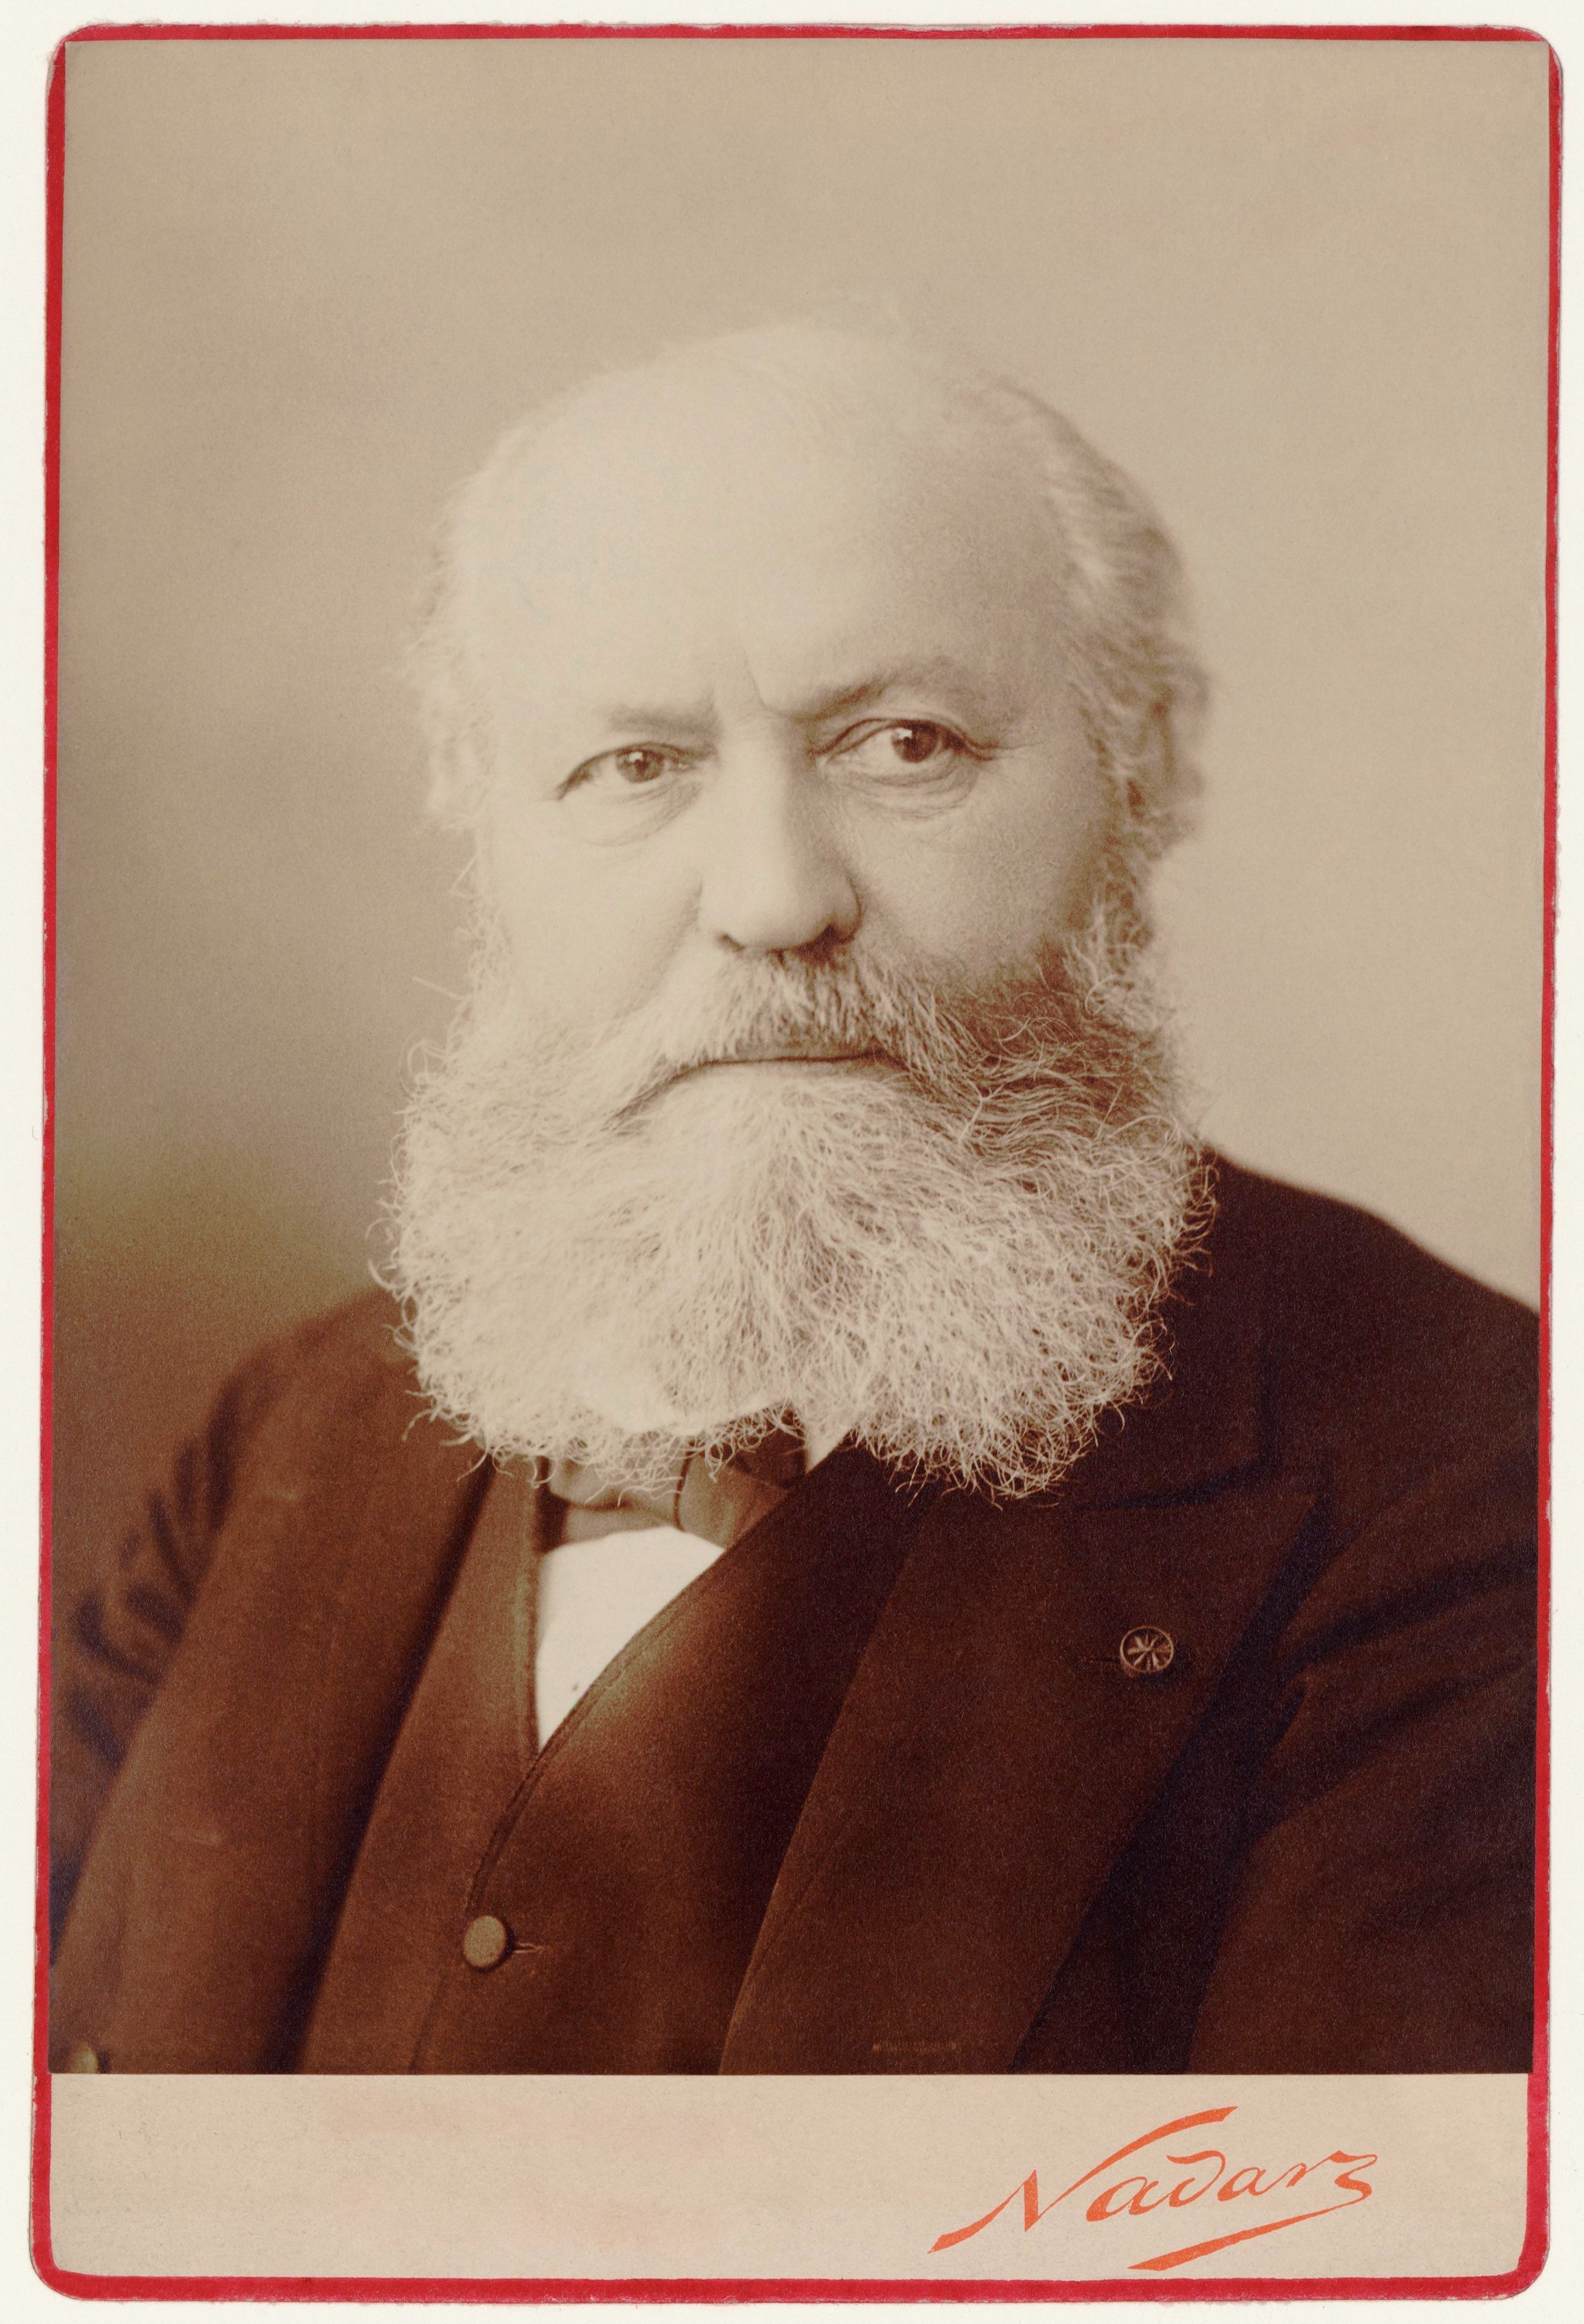 Portrait of composer Charles Gounod by Nadar (1890)